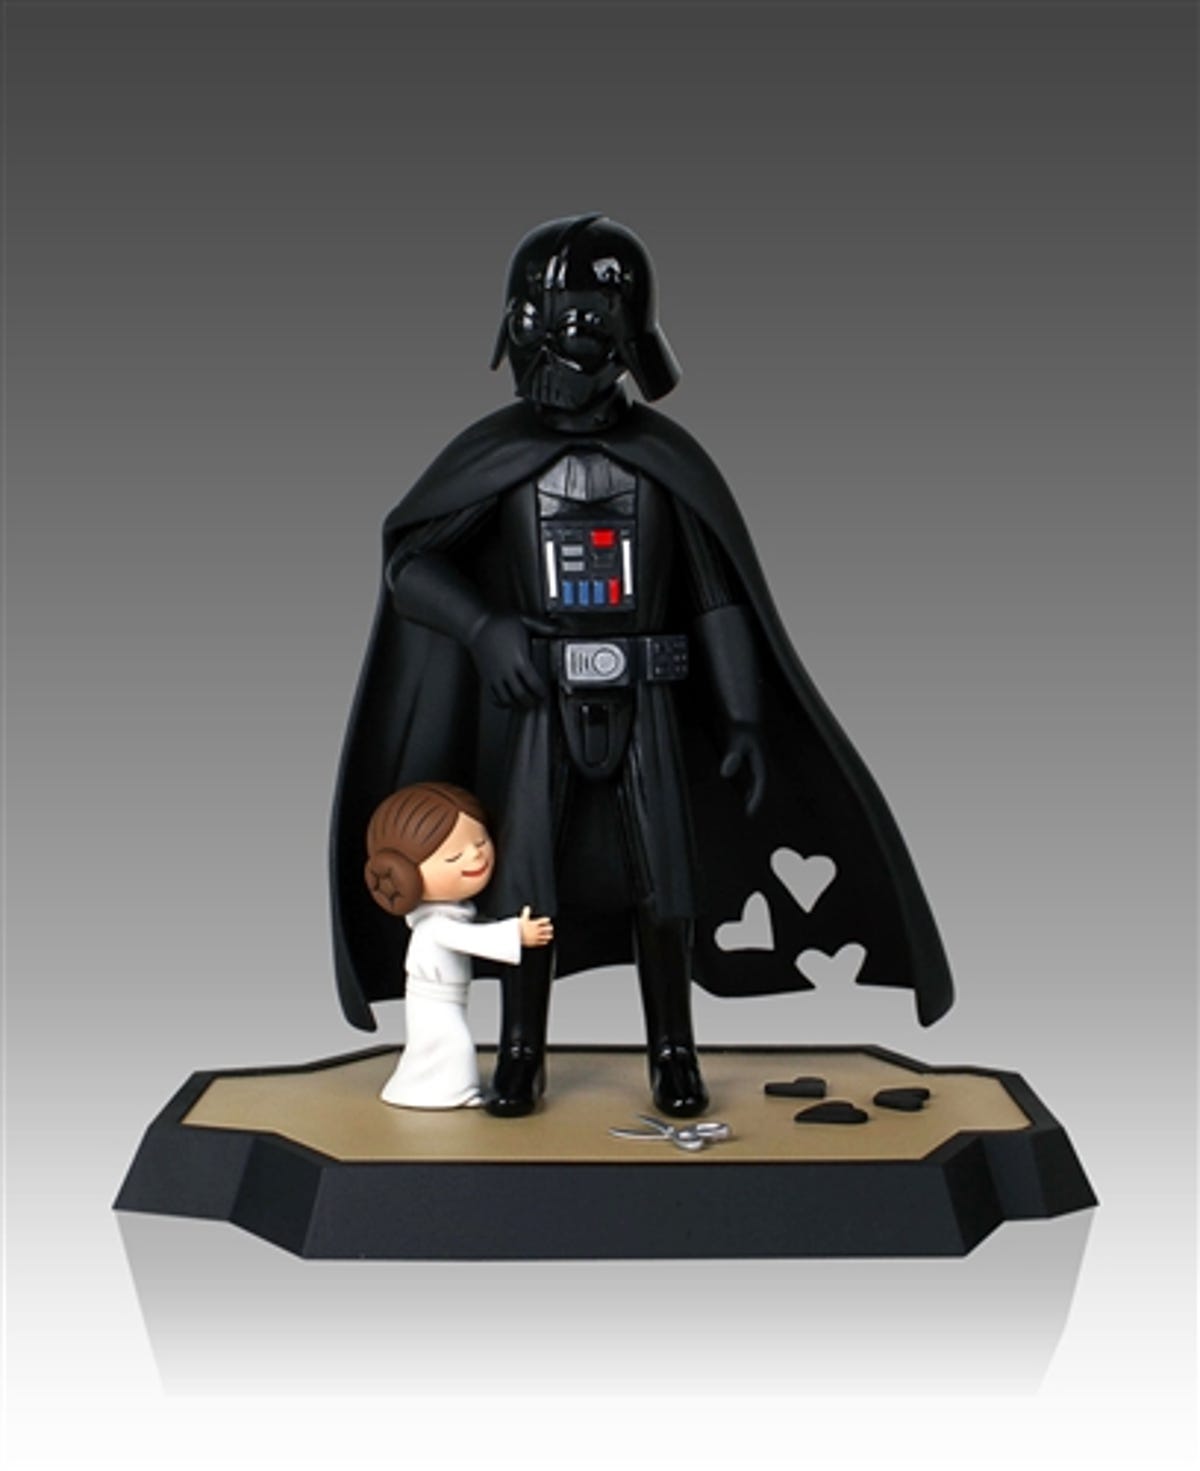 Characters from Jeffrey Brown's bestselling kids books "Darth Vader and Son" and "Vader's Little Princess" come to life with these collectibles from Gentle Giant Studios.